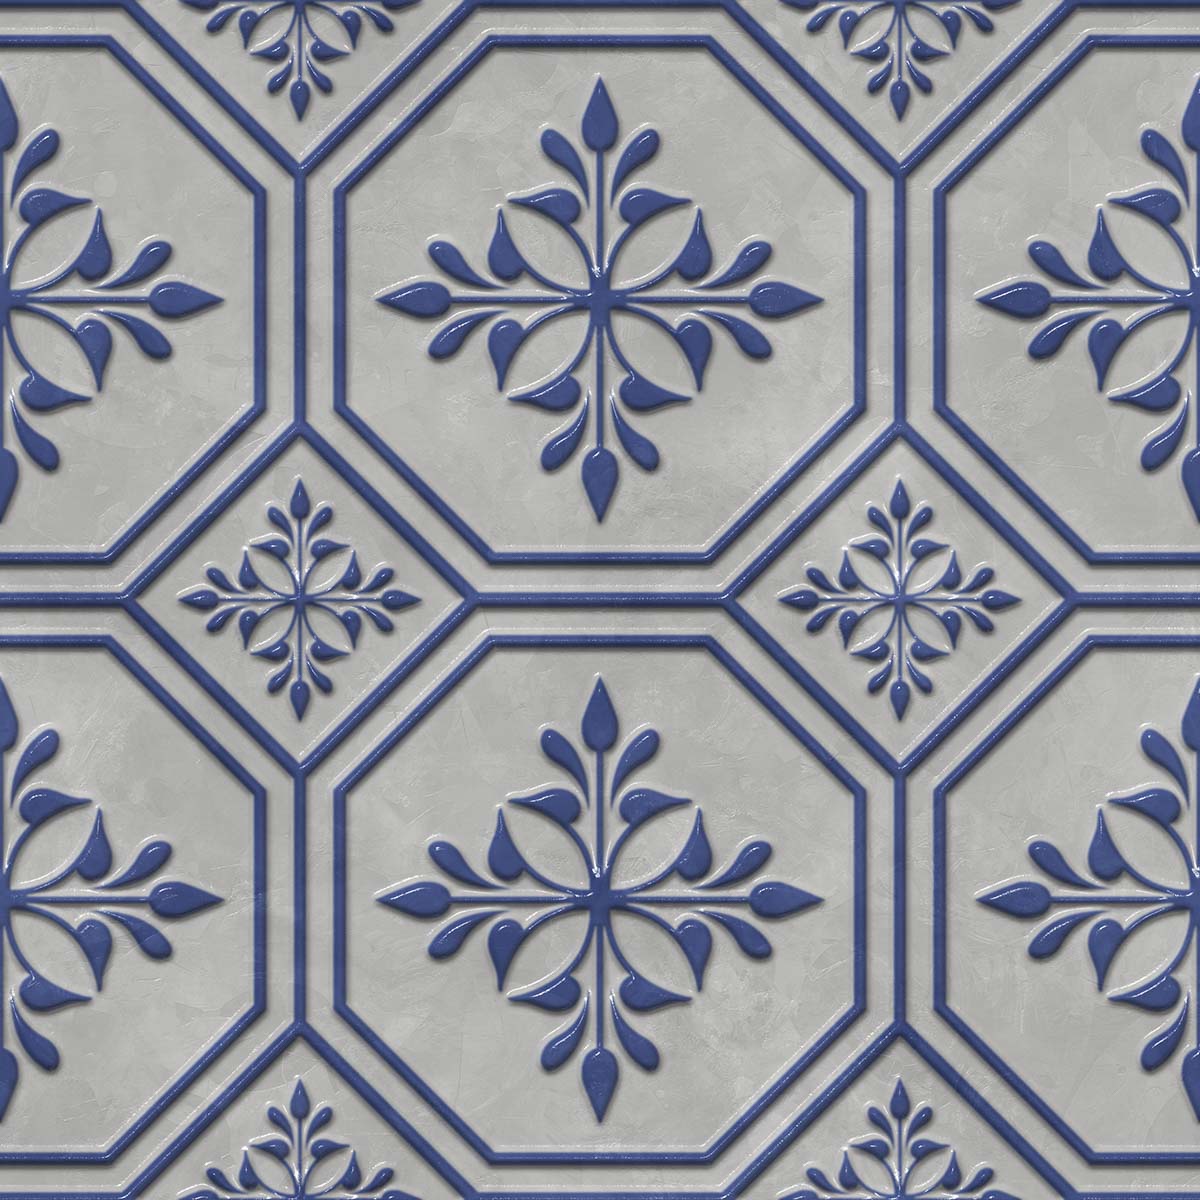 A pattern of blue and white tiles